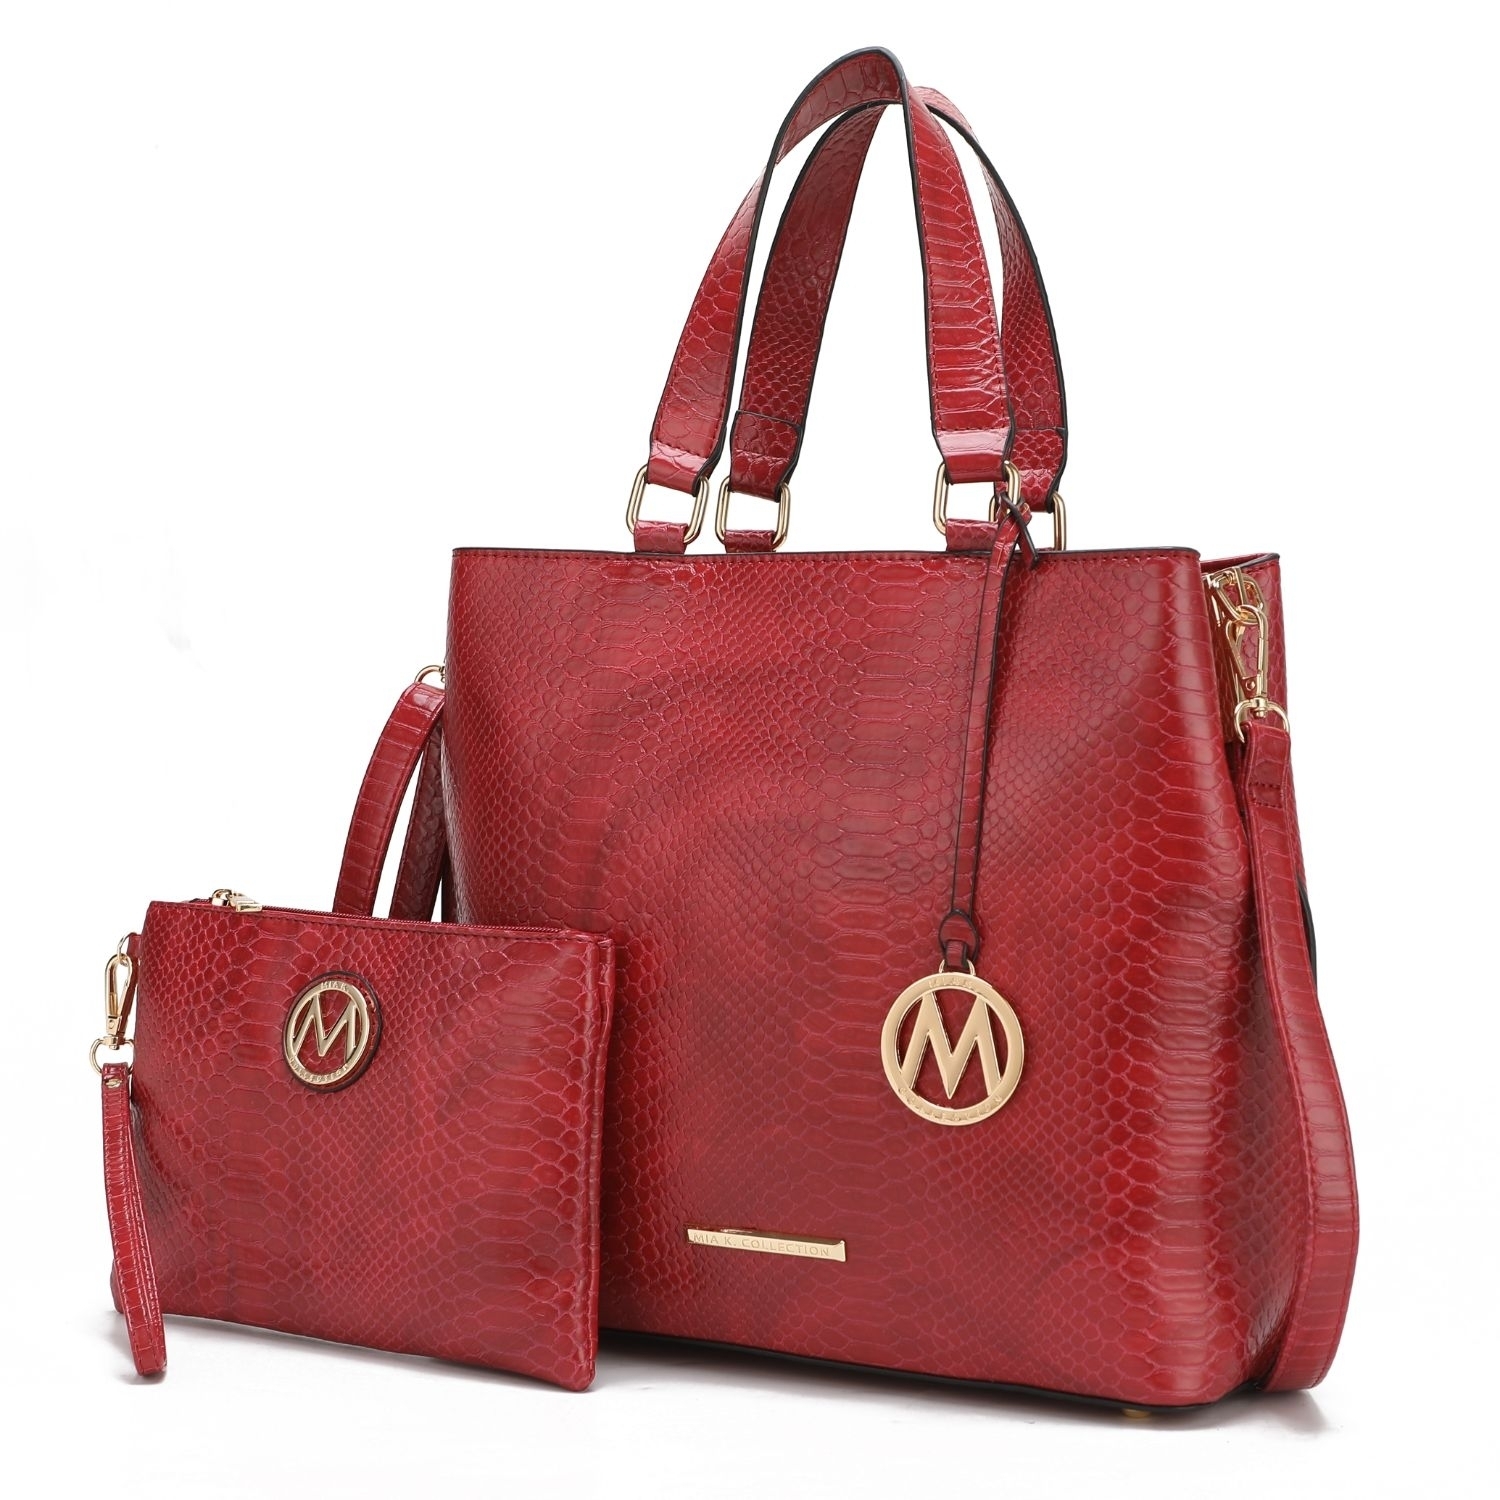 MKF Collection Beryl Snake-embossed Vegan Leather Women's Tote Handbag With Wristlet - 2 Pieces, By Mia K - Olive